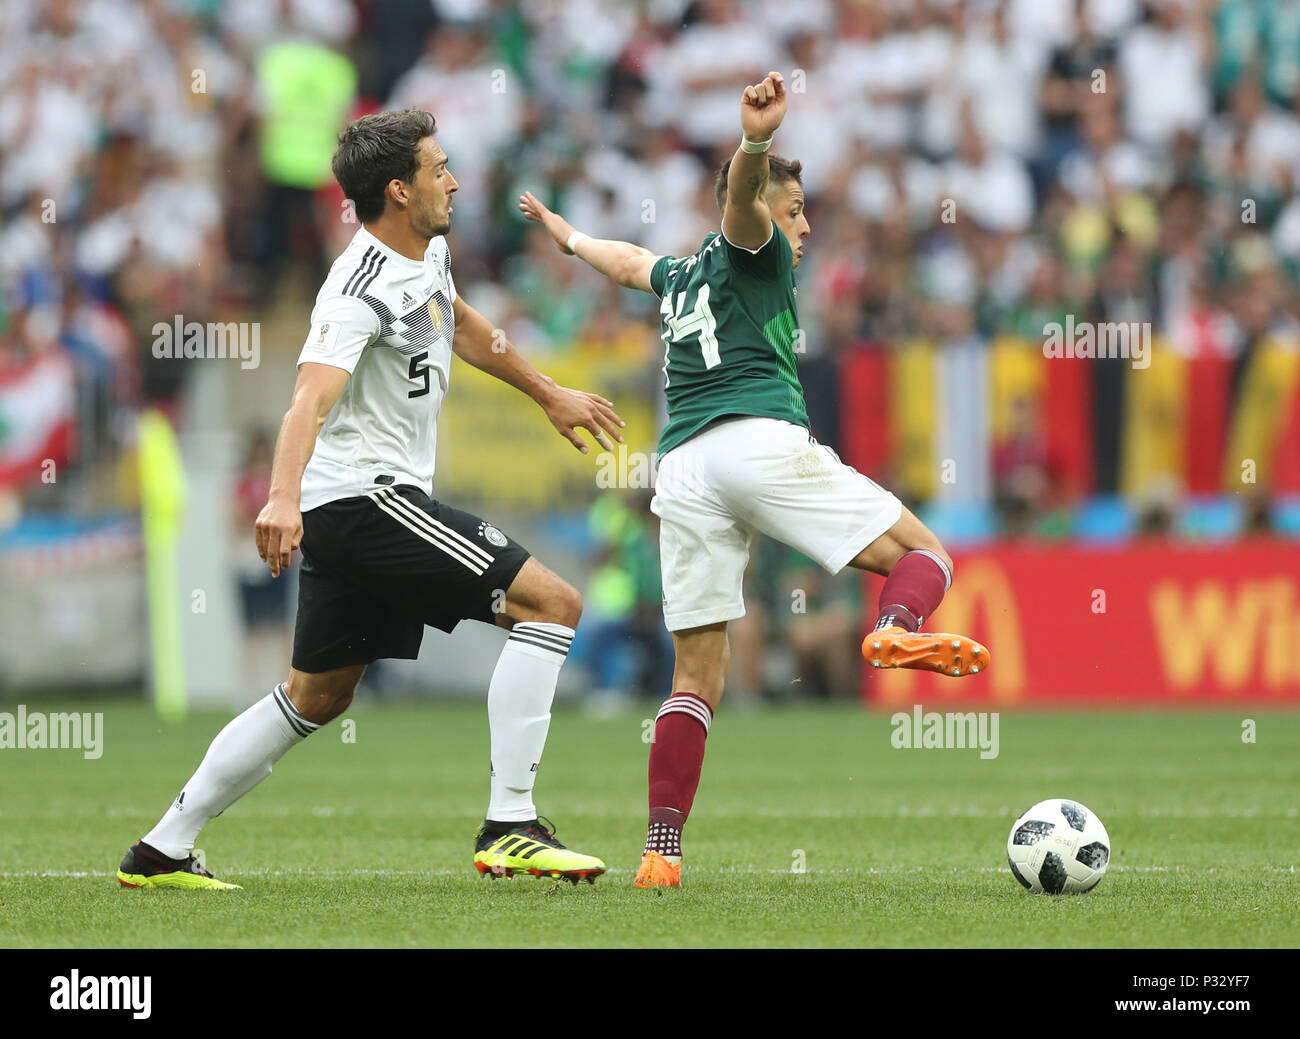 Moscow, Russia. 17th June, 2018. Mats Hummels (L) of Germany vies with Javier Hernandez of Mexico during a group F match between Germany and Mexico at the 2018 FIFA World Cup in Moscow, Russia, June 17, 2018. Credit: Xu Zijian/Xinhua/Alamy Live News Stock Photo